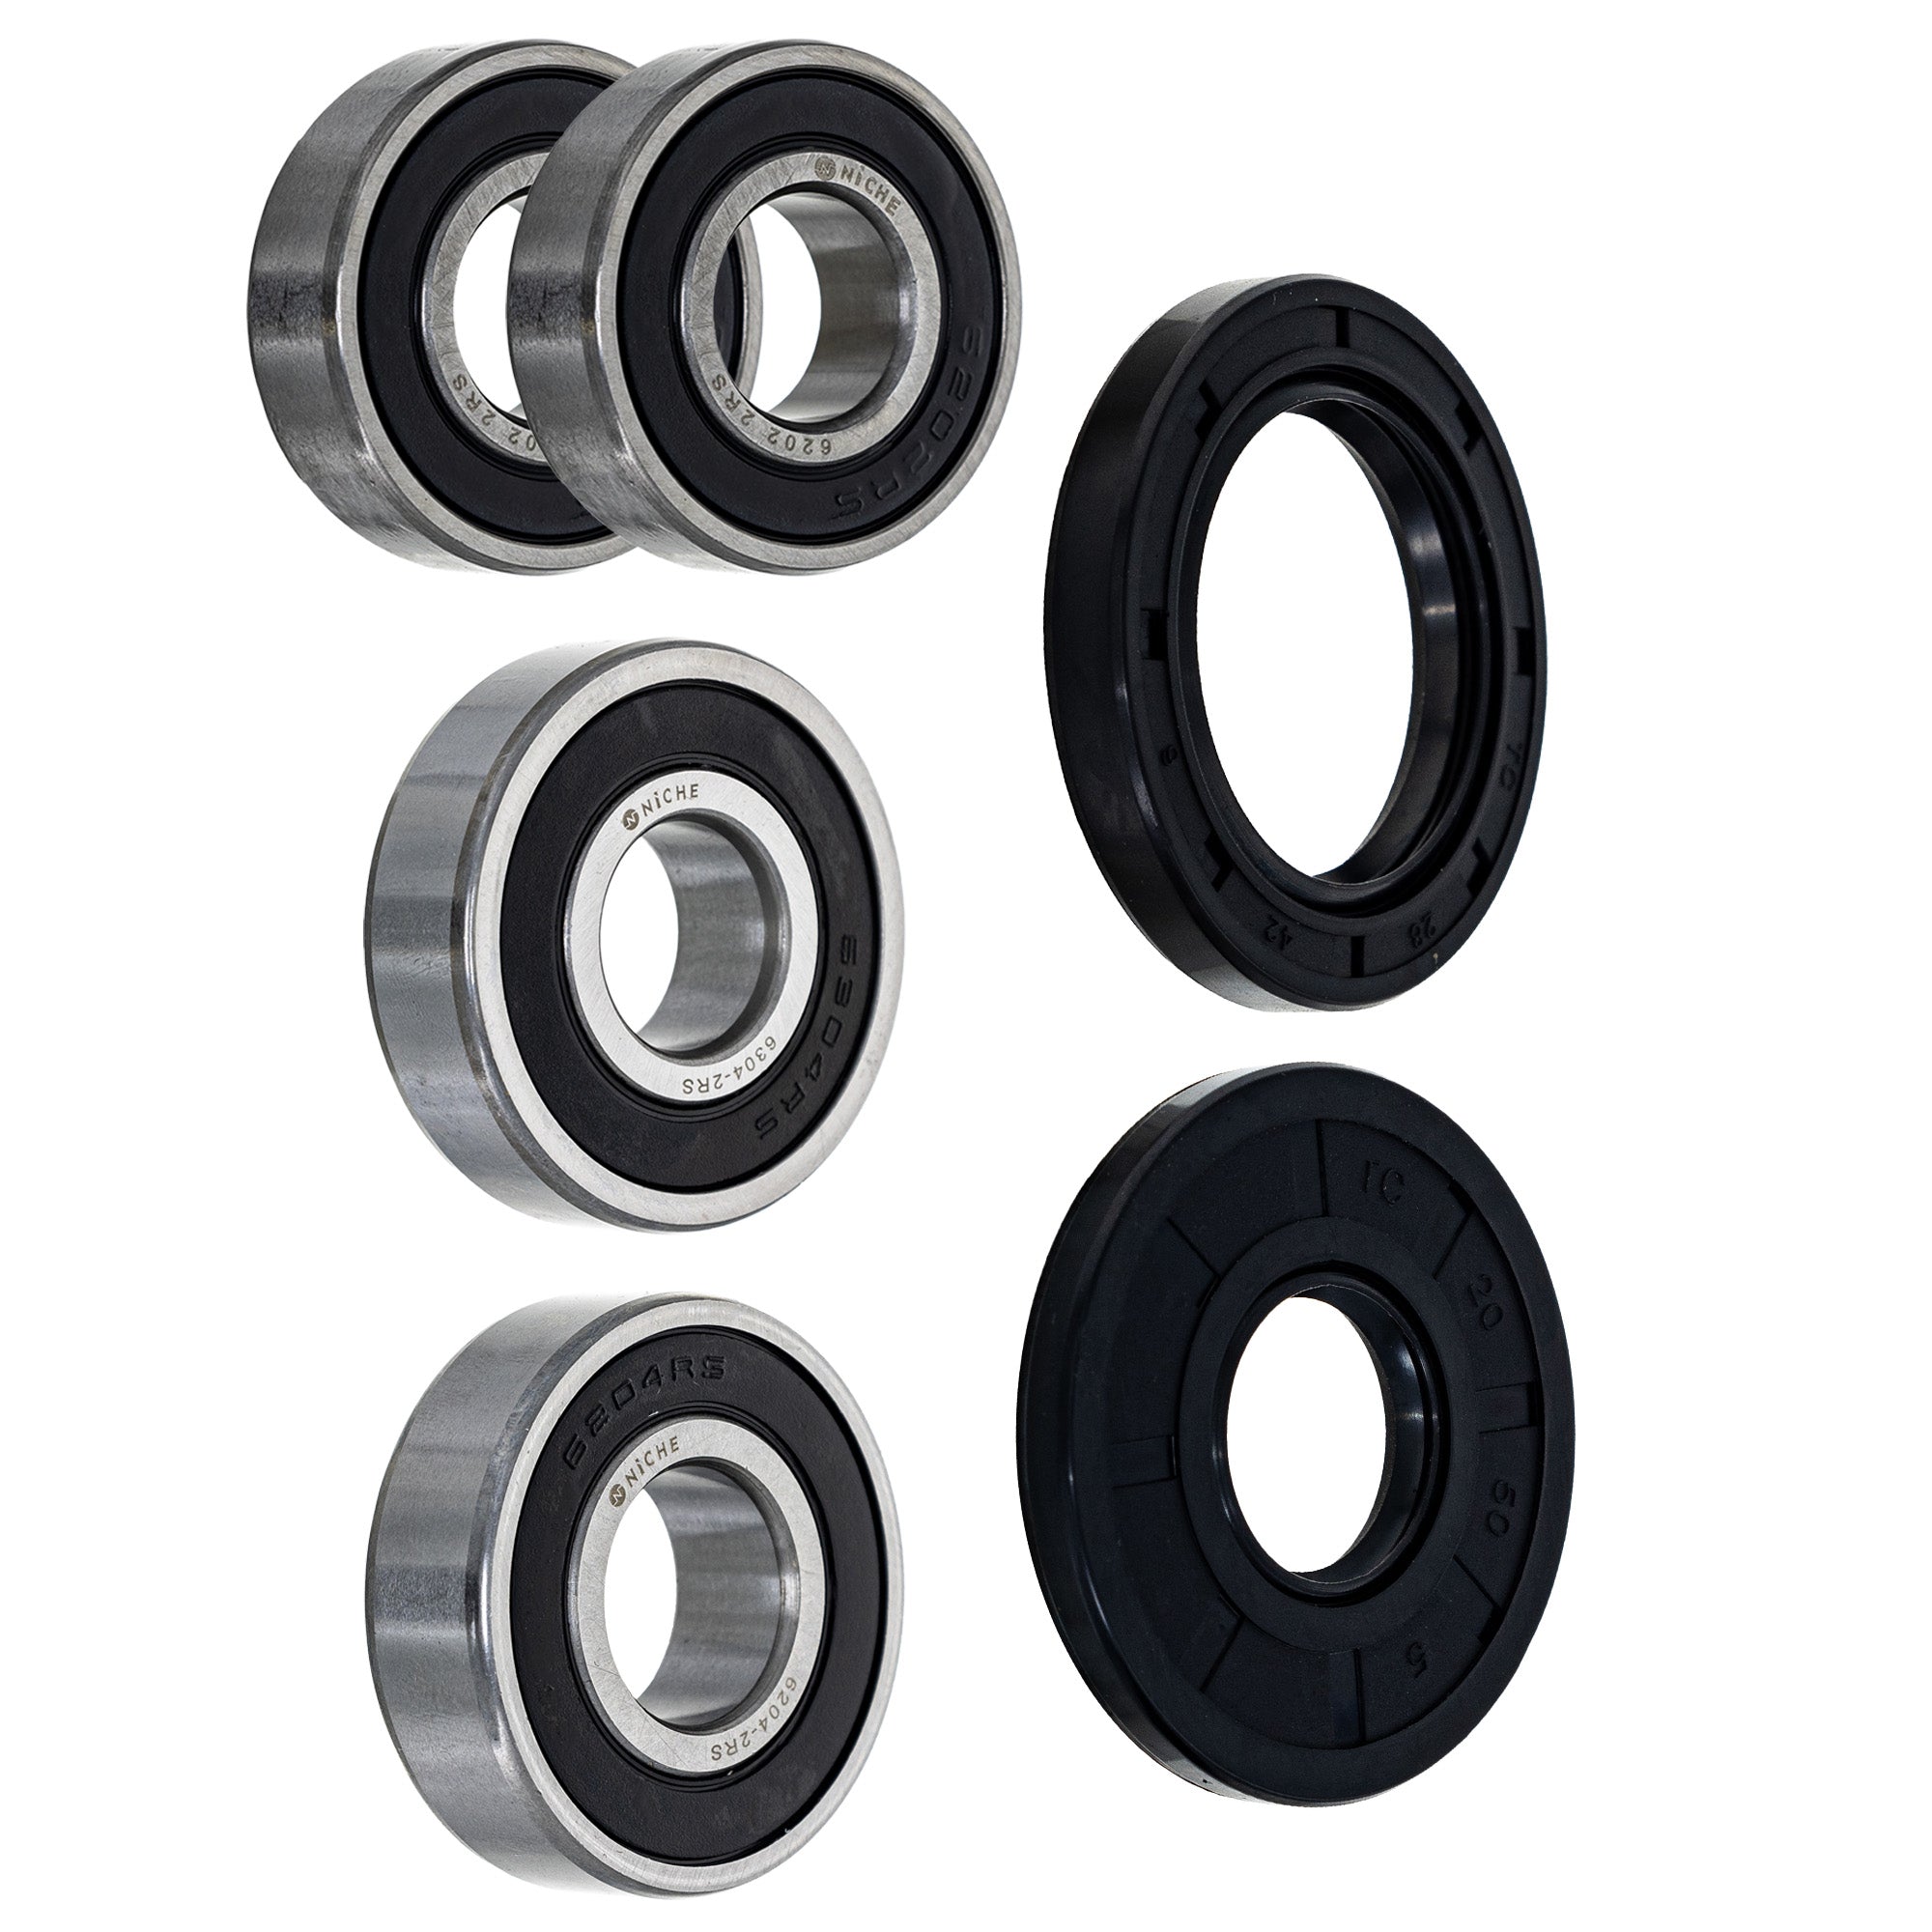 Wheel Bearing Seal Kit for zOTHER Ref No Elsinore NICHE MK1008810